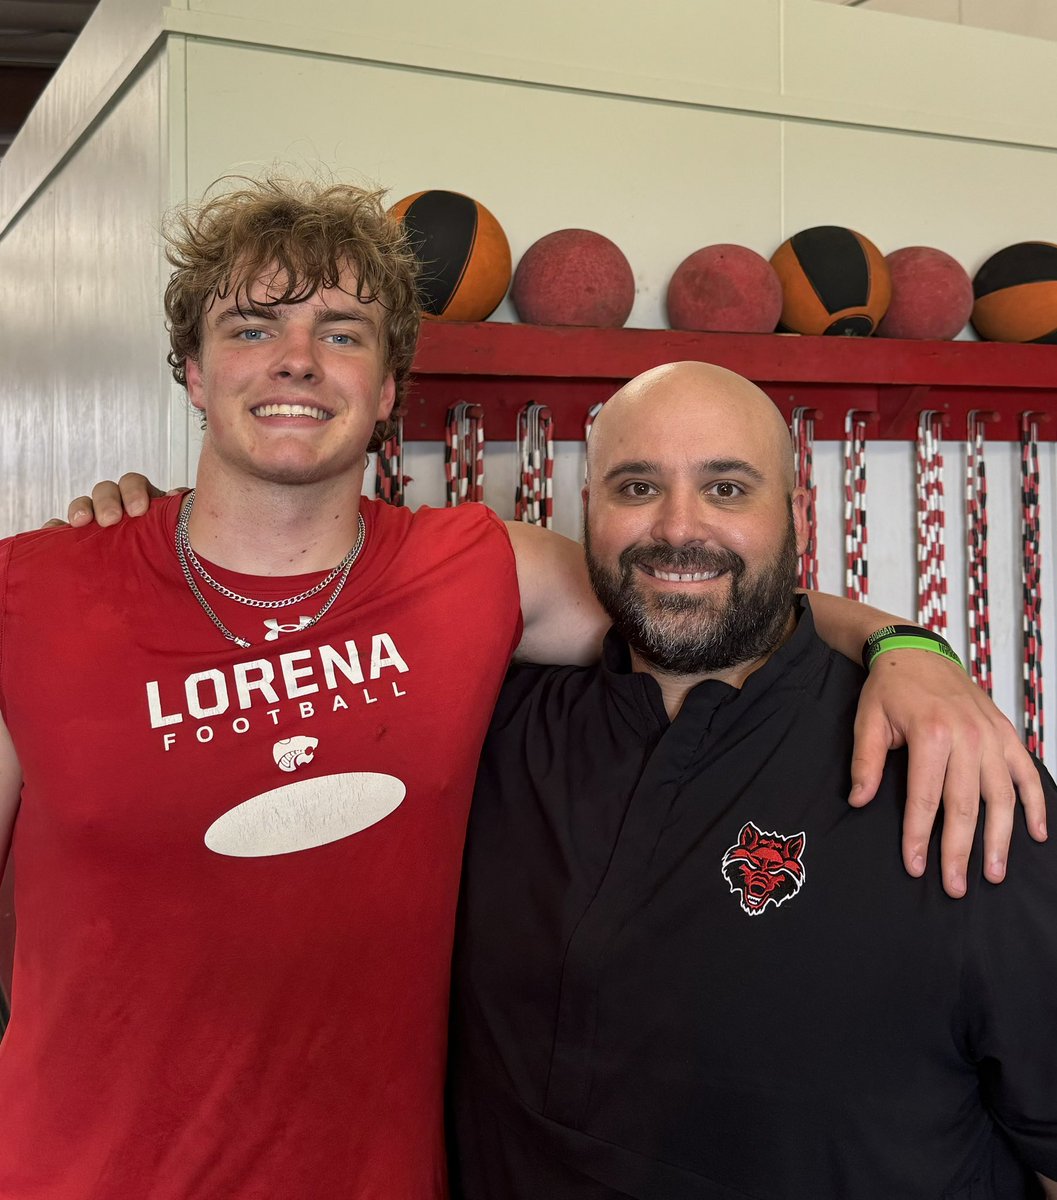 Great catching up with @CoachNickGrimes at workouts today! Appreciate you taking time to visit with me! @AStateFB @CoachButchJones 
#WolvesUp x #ADifferentBreed
@LorenaFootball @Athletics_LISD